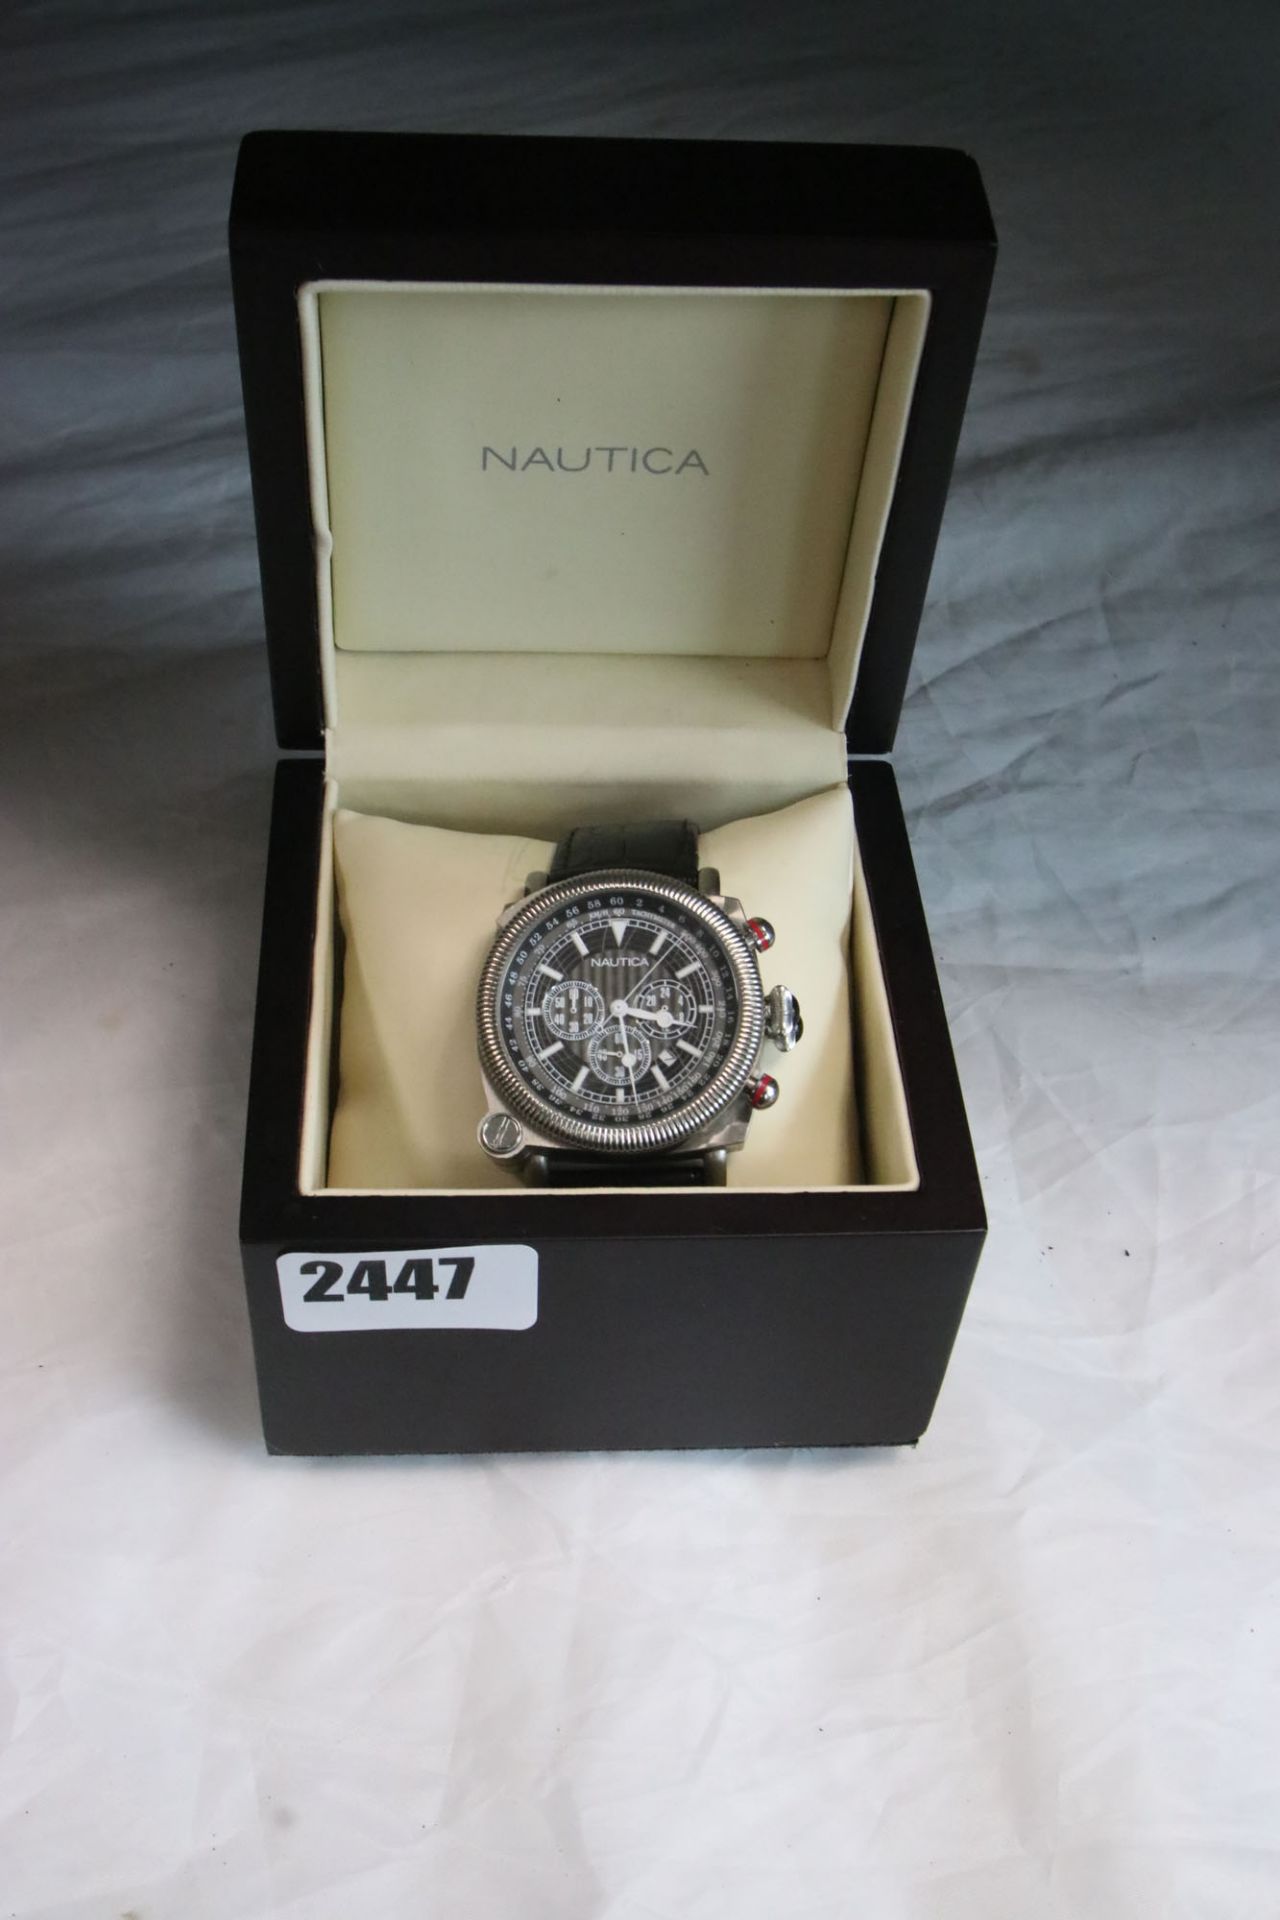 Nautica chronograph dial watch with 24-hour dial hidden watch